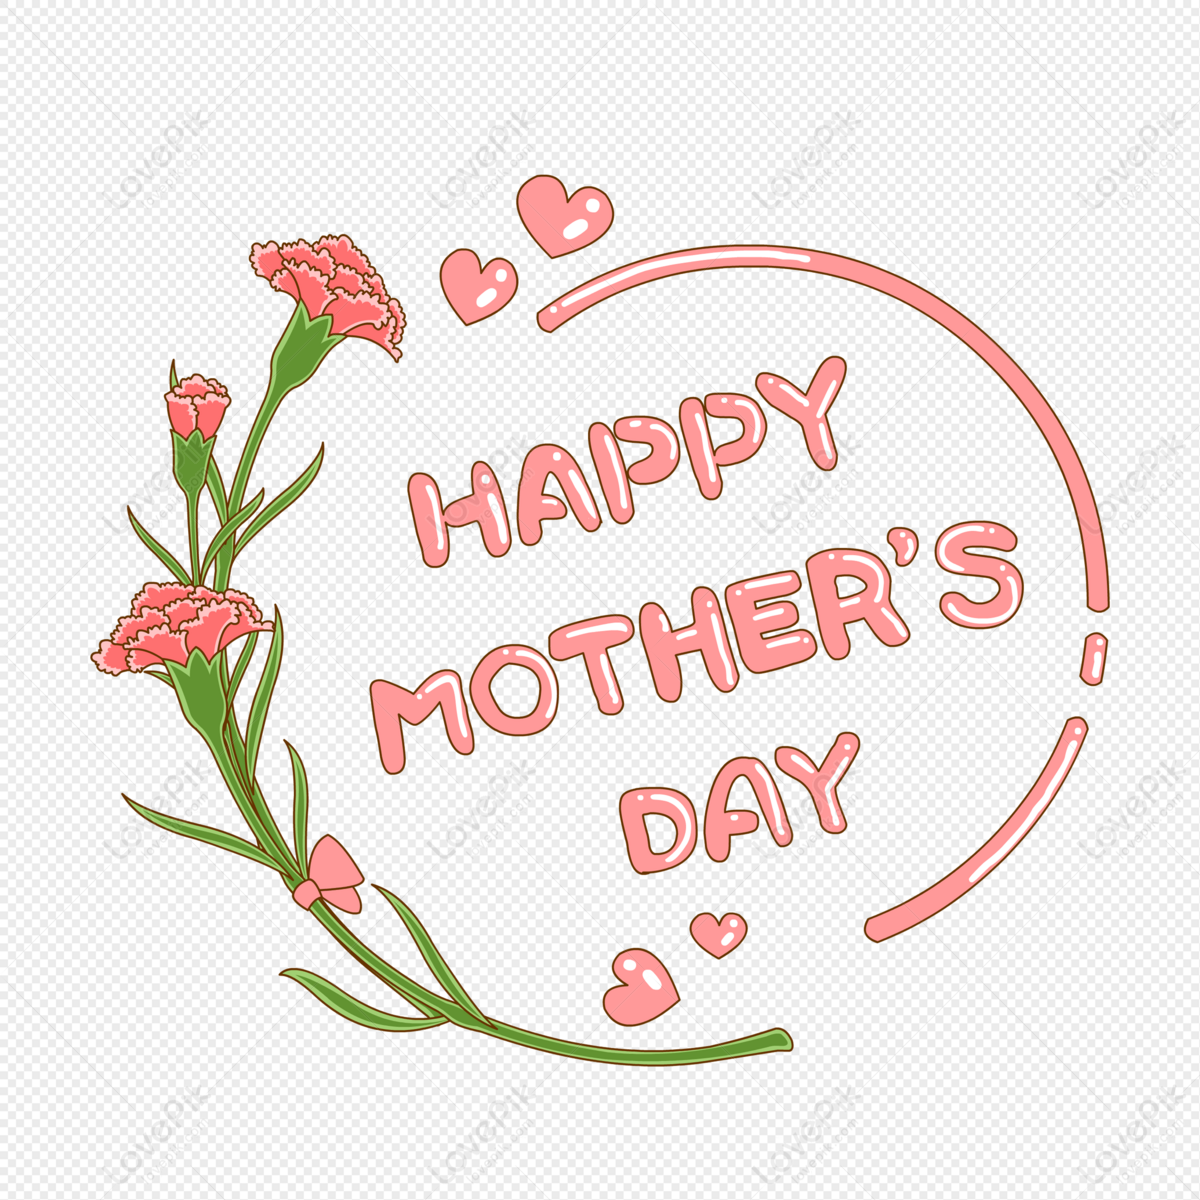 Mothers Day Wishes PNG Image Free Download And Clipart Image For ...